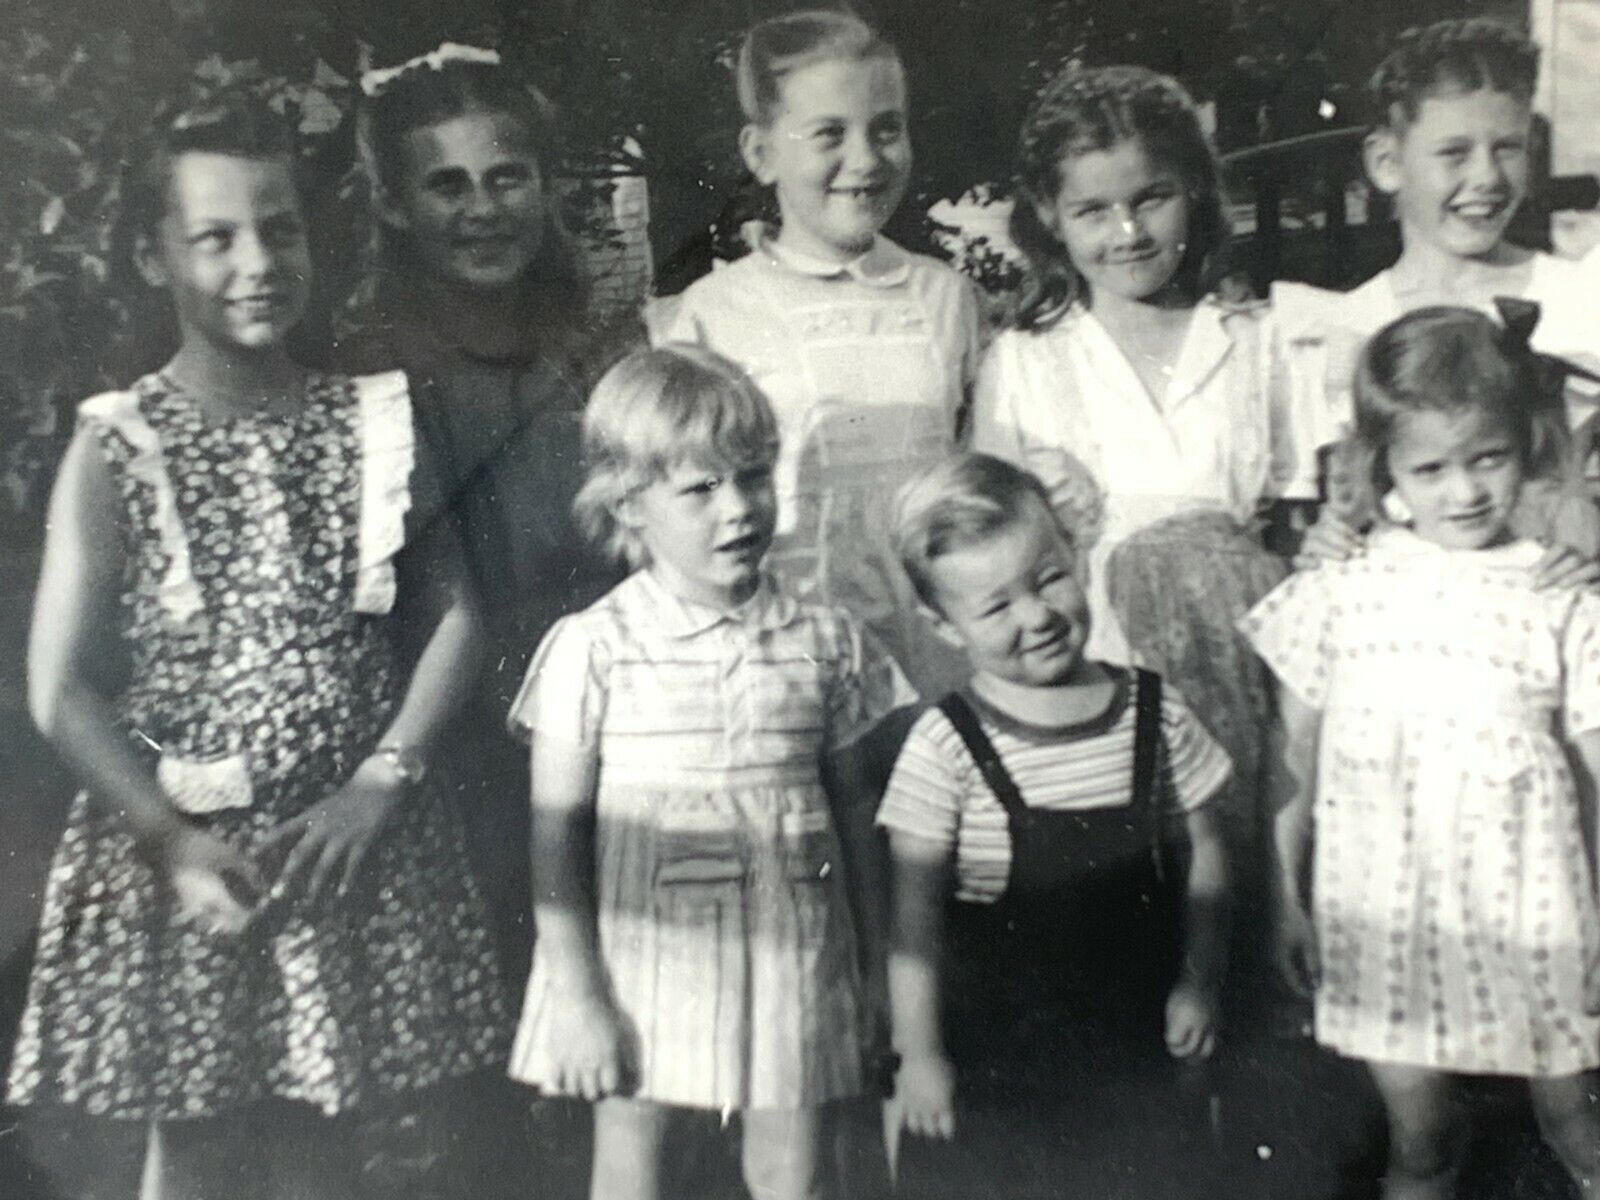 E7 Found Photograph Group Of Kids Girls & Boy Brother 1940-50's